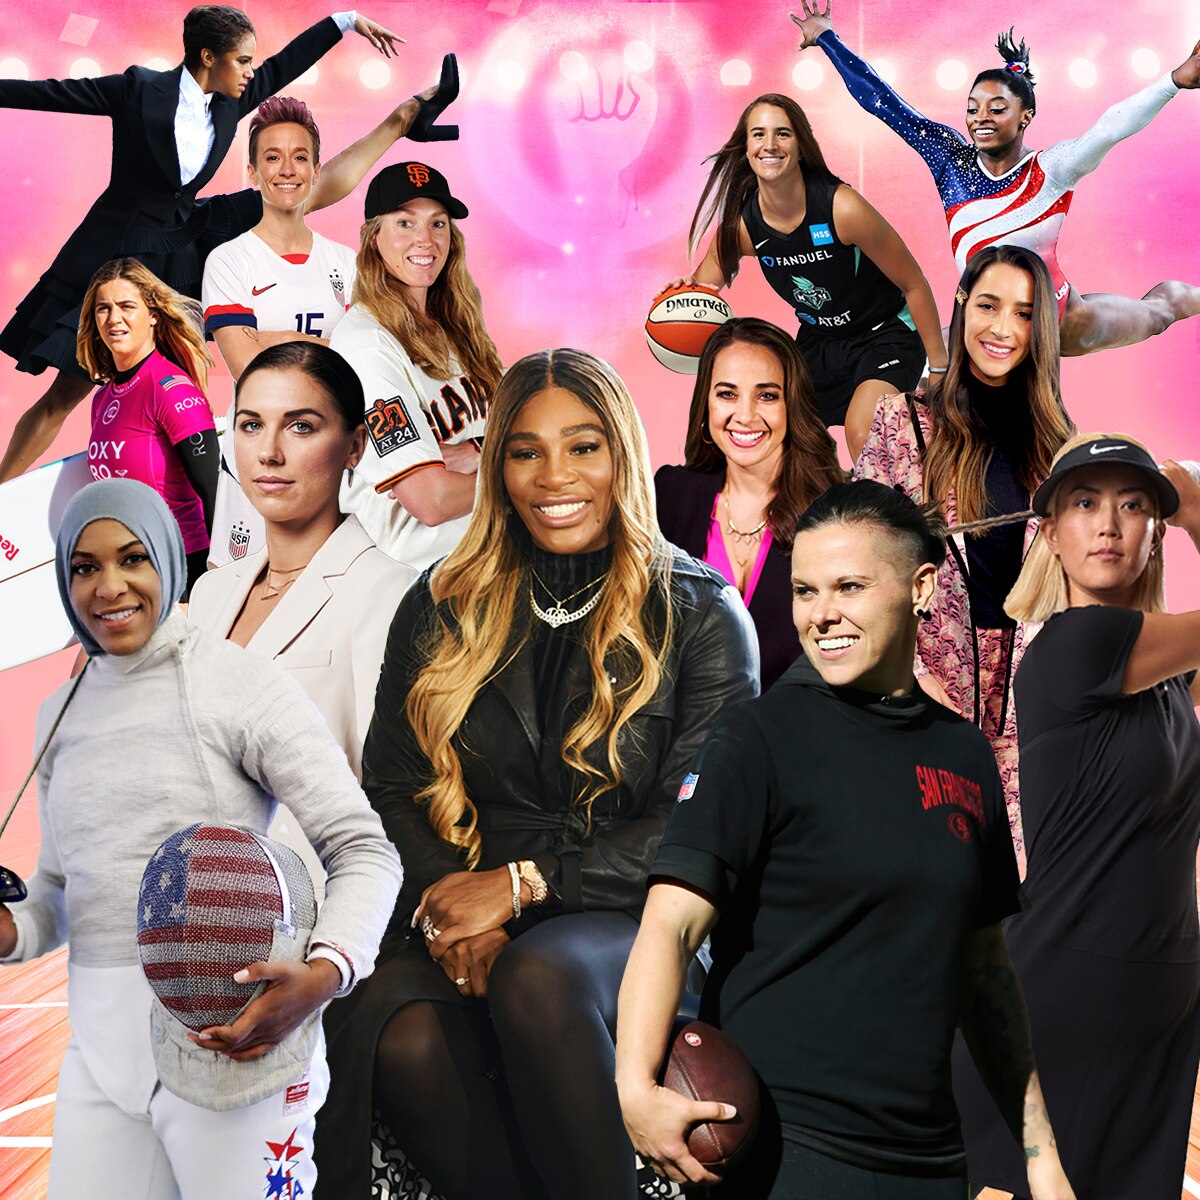 Youll Get a Kick Out of These Inspiring Female Athletes